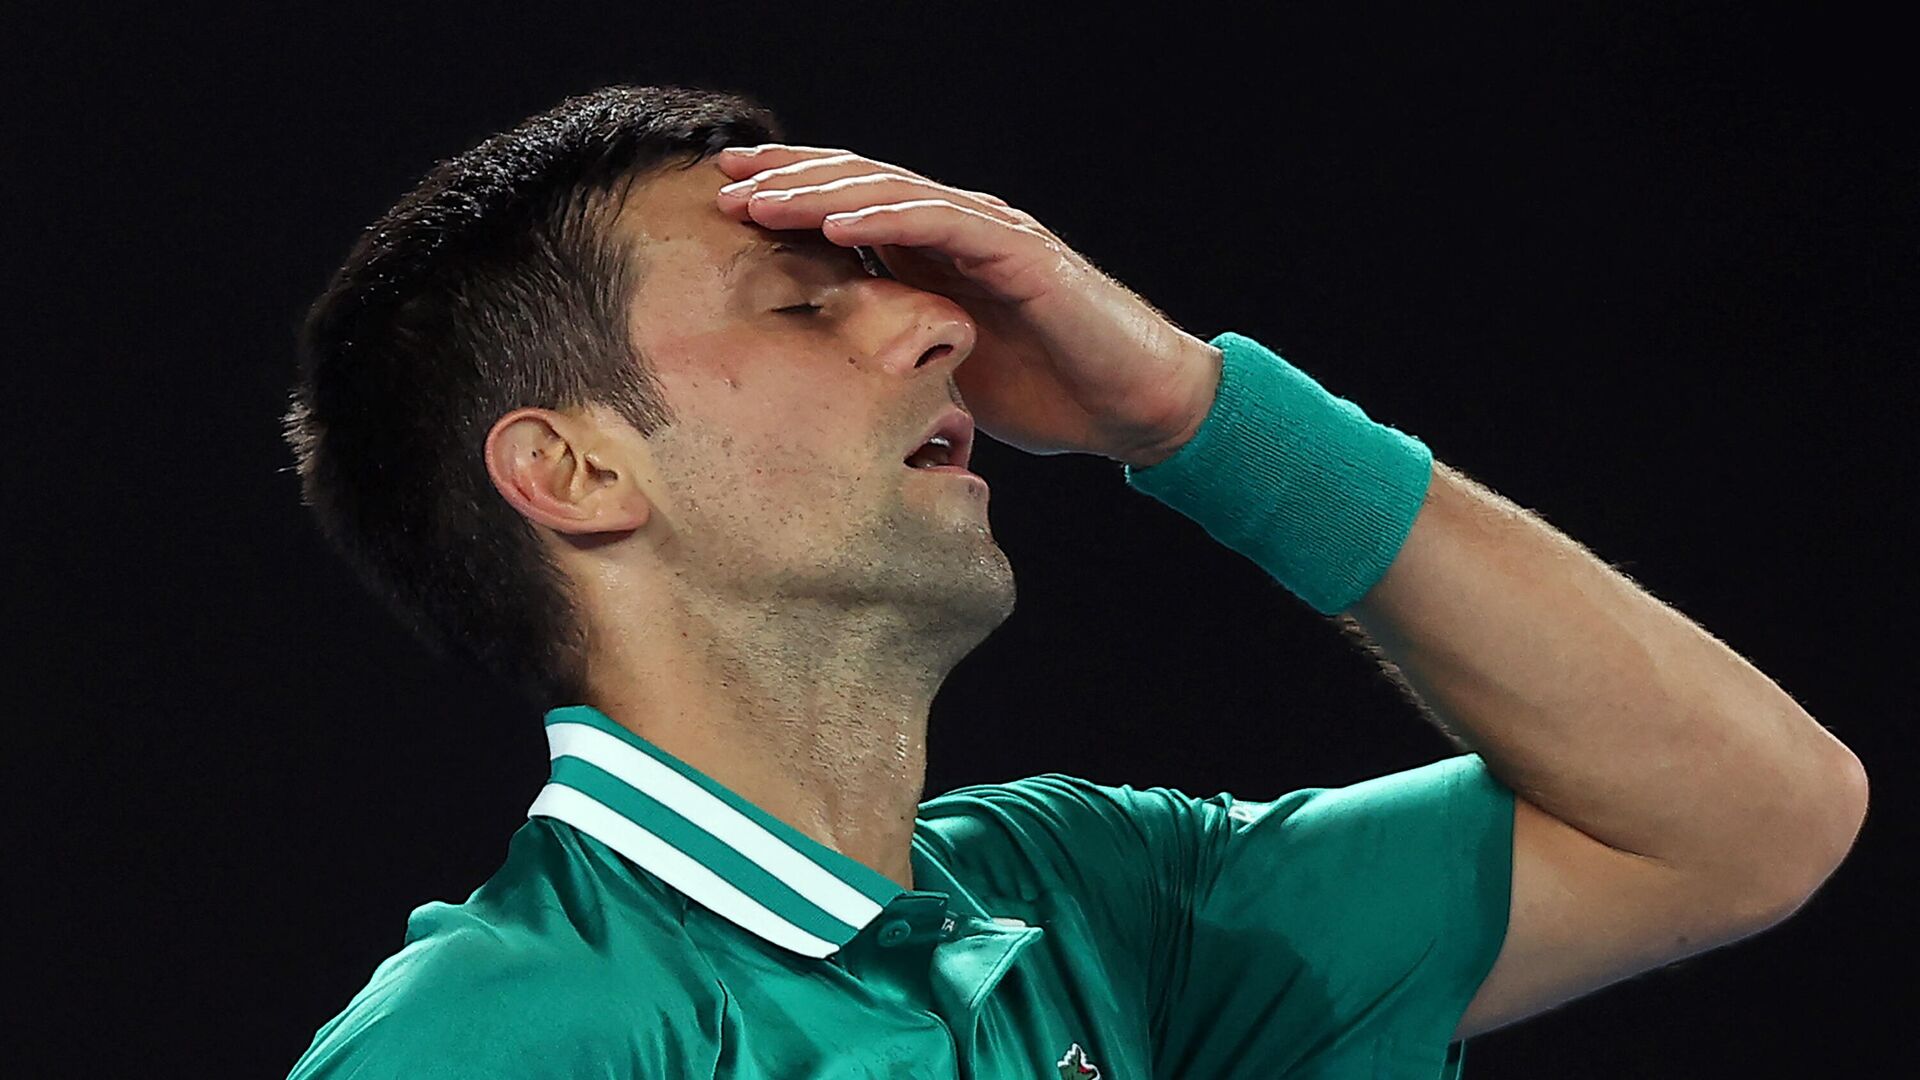 (FILES) This file photo taken on February 16, 2021 shows Serbia's Novak Djokovic reacting after losing a point against Germany's Alexander Zverev during their men's singles quarter-final match on day nine of the Australian Open tennis tournament in Melbourne - Sputnik International, 1920, 14.01.2022